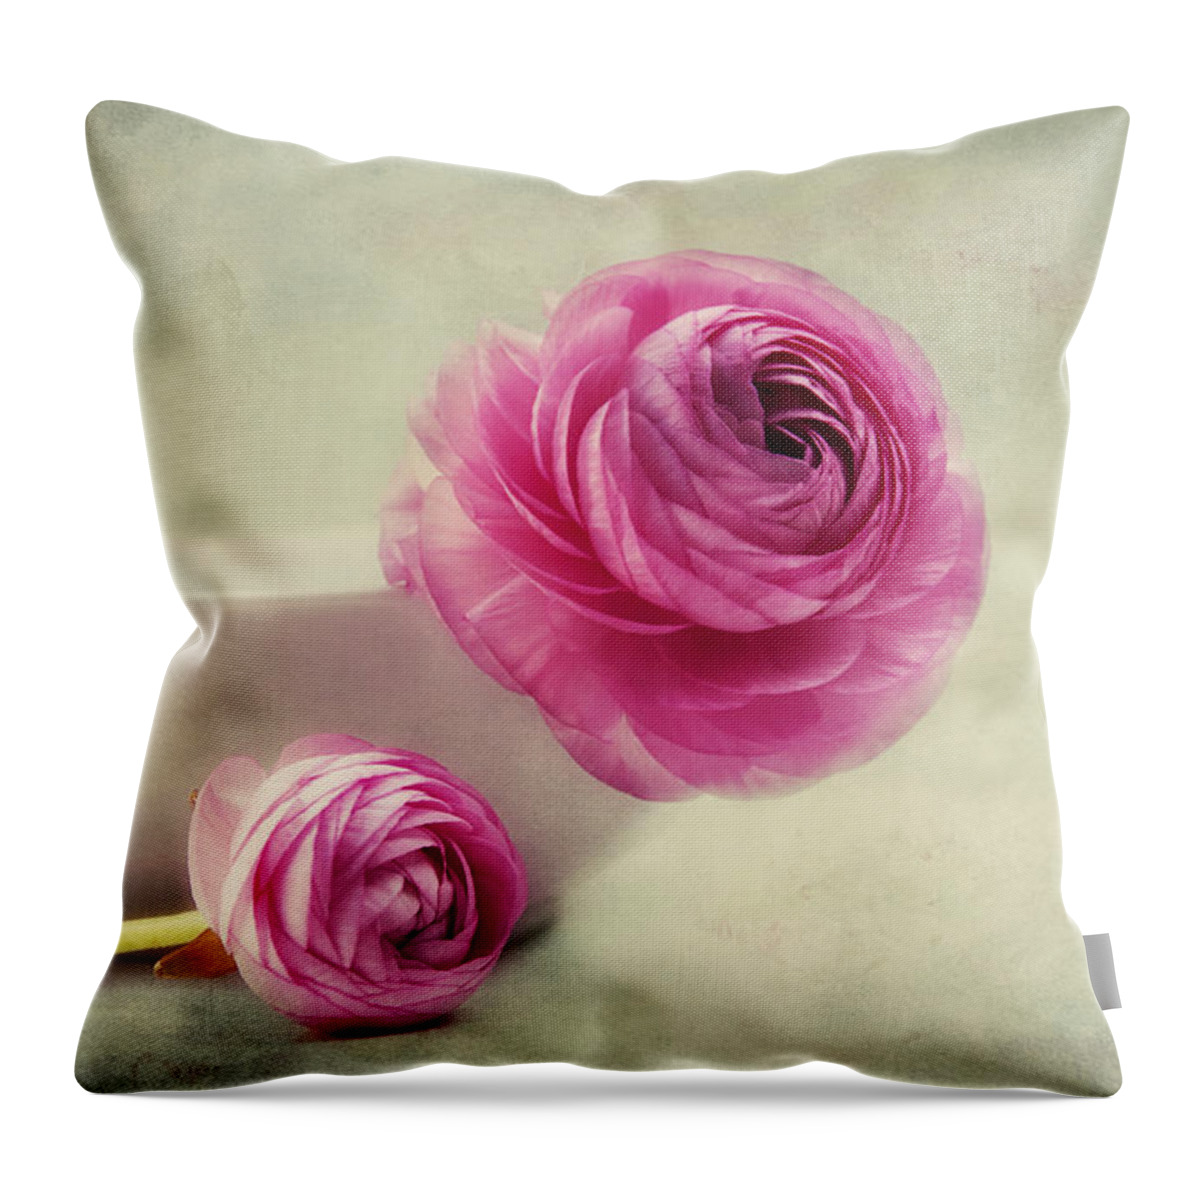 Still Life Throw Pillow featuring the photograph Mother And Daughter by Claudia Moeckel